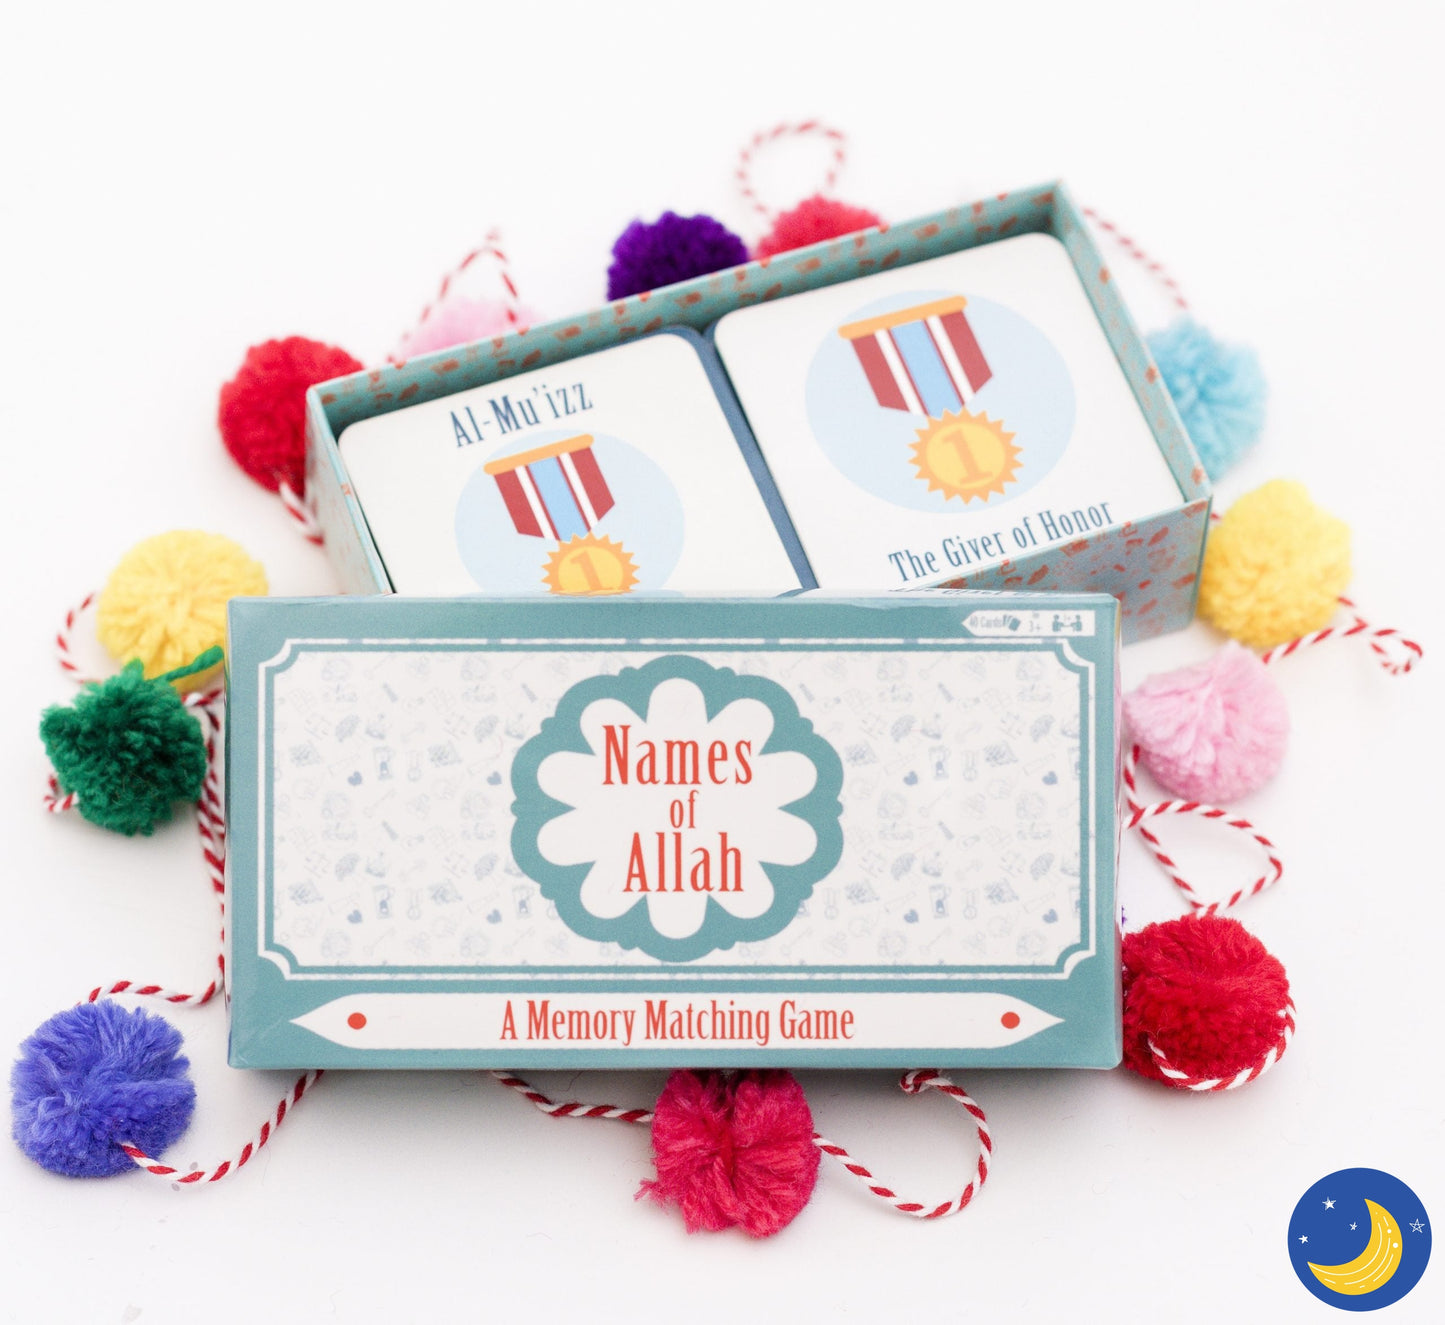 Names of Allah 1 : A Memory Matching Game-Islamic Books-Zair Zabr Play-Crescent Moon Store